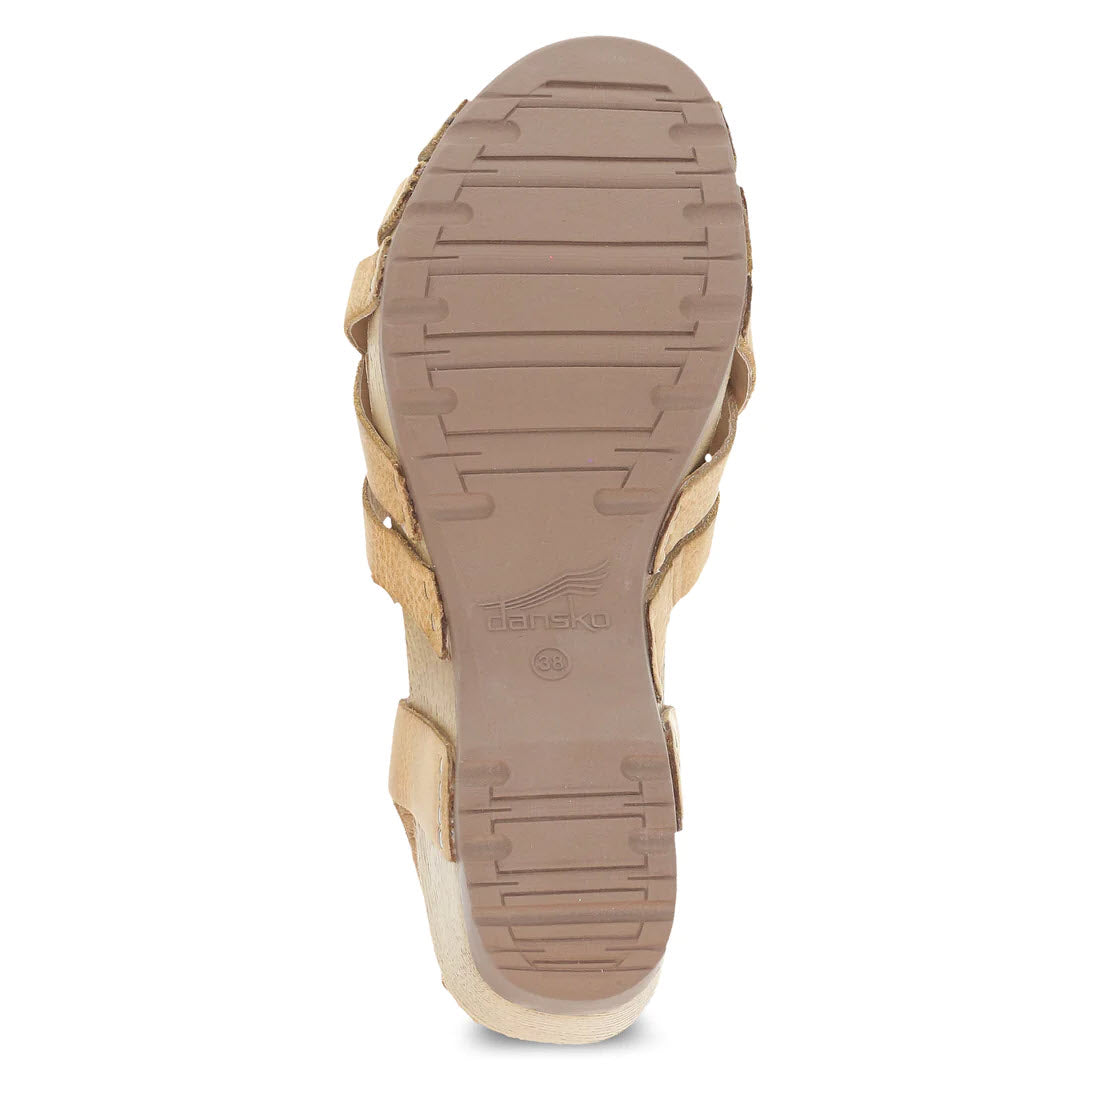 Bottom view of a beige Dansko sandal showing a textured rubber sole with a logo imprint, perfect as a summer staple.